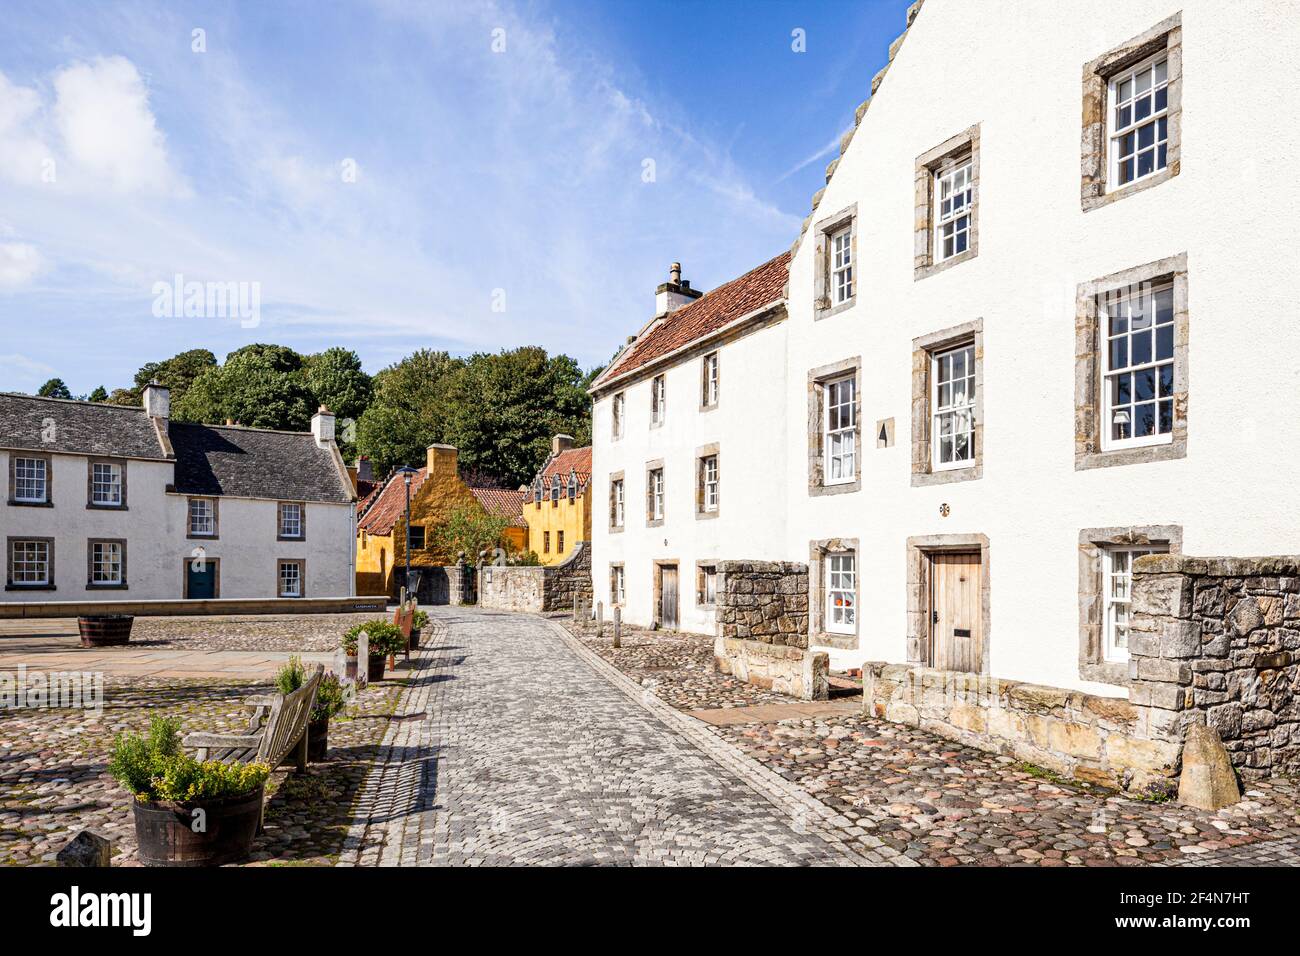 Historic buildings in the square in the Royal Burgh of Culross, Fife, Scotland UK Stock Photo